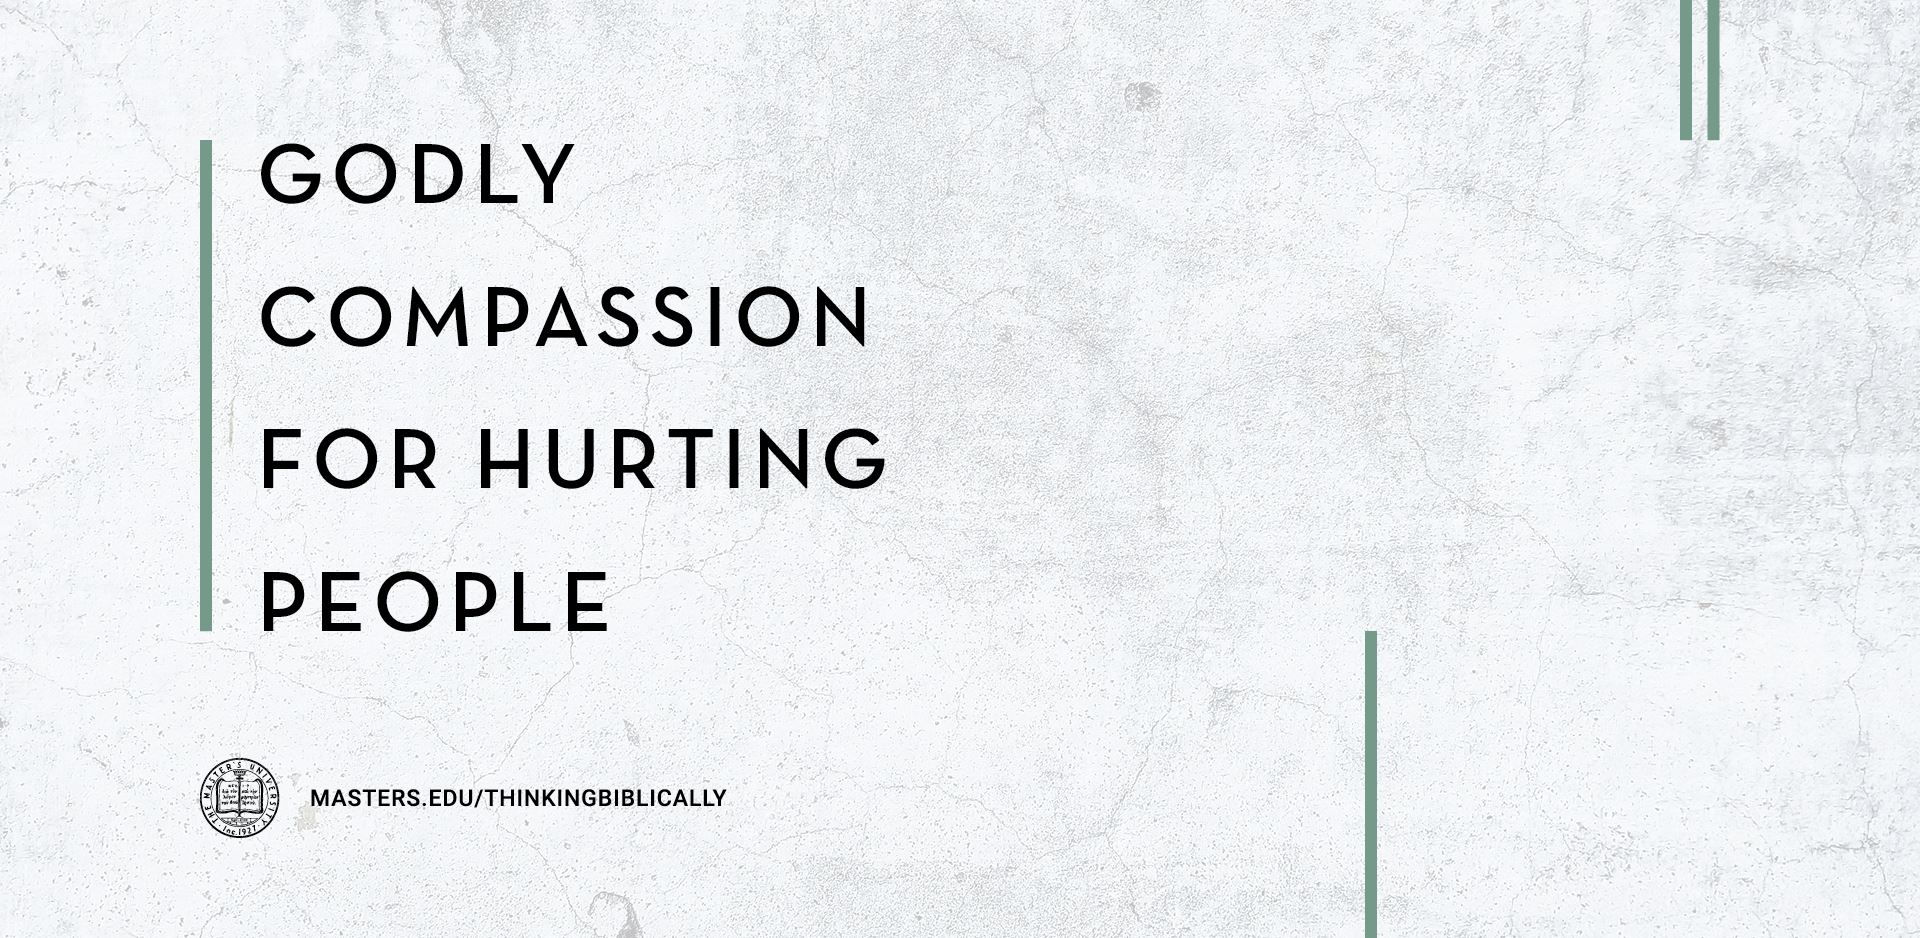 Godly Compassion for Hurting People Featured Image